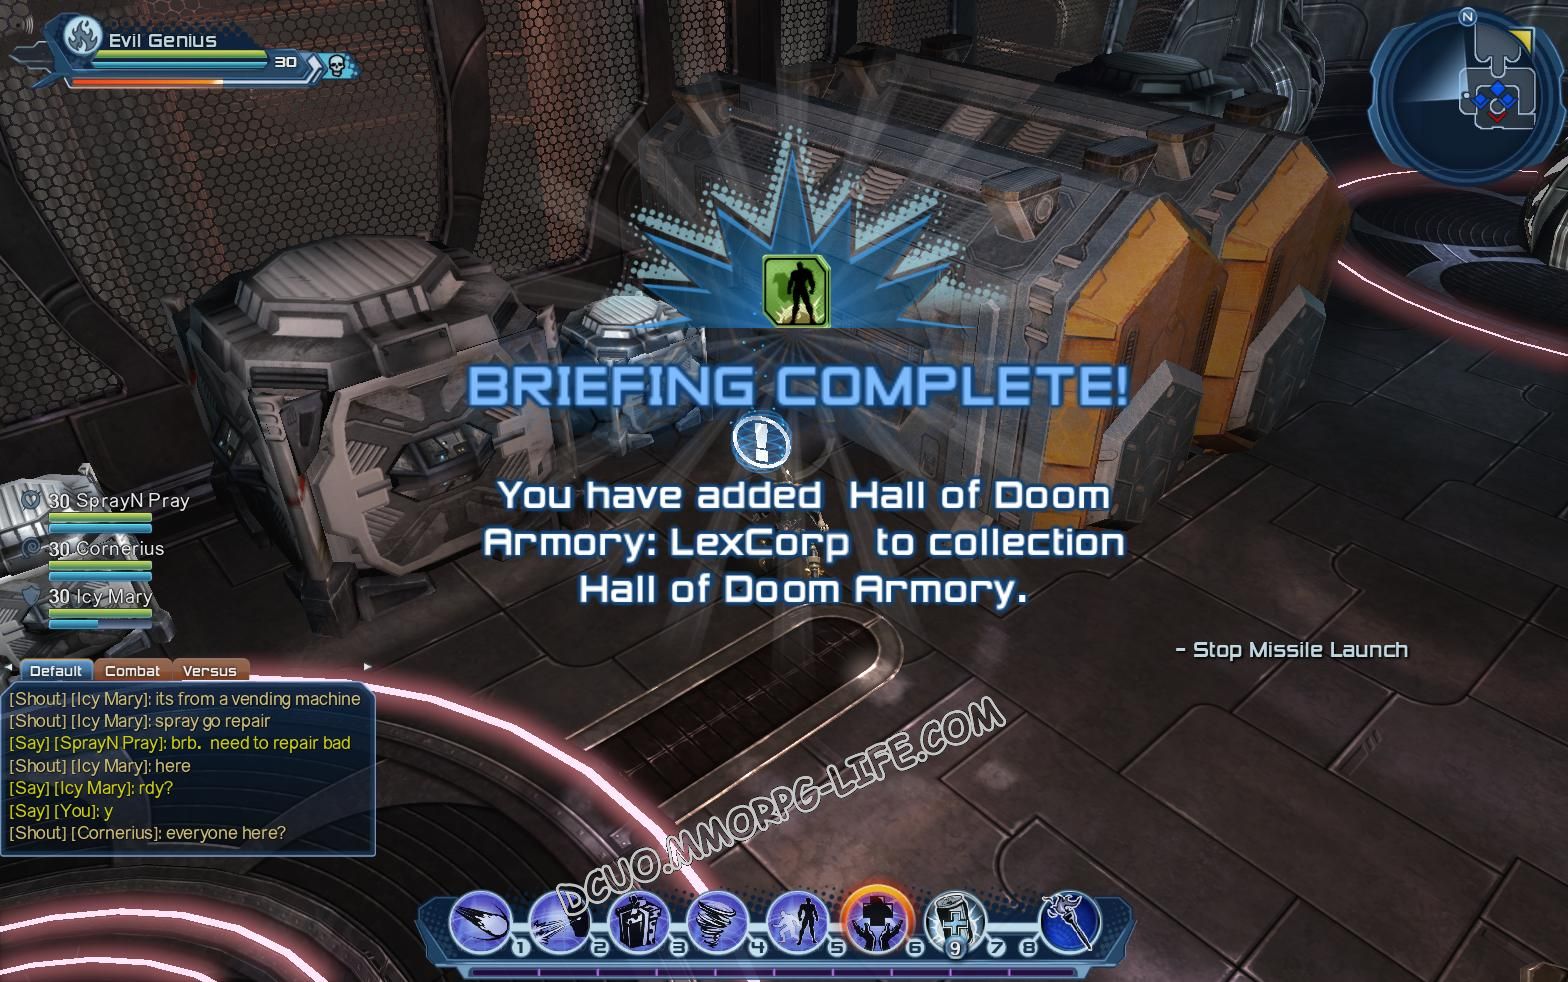 Briefing: Hall of Doom Armory, step 4 Hall of Doom Armory: LexCorp  image 1960 middle size